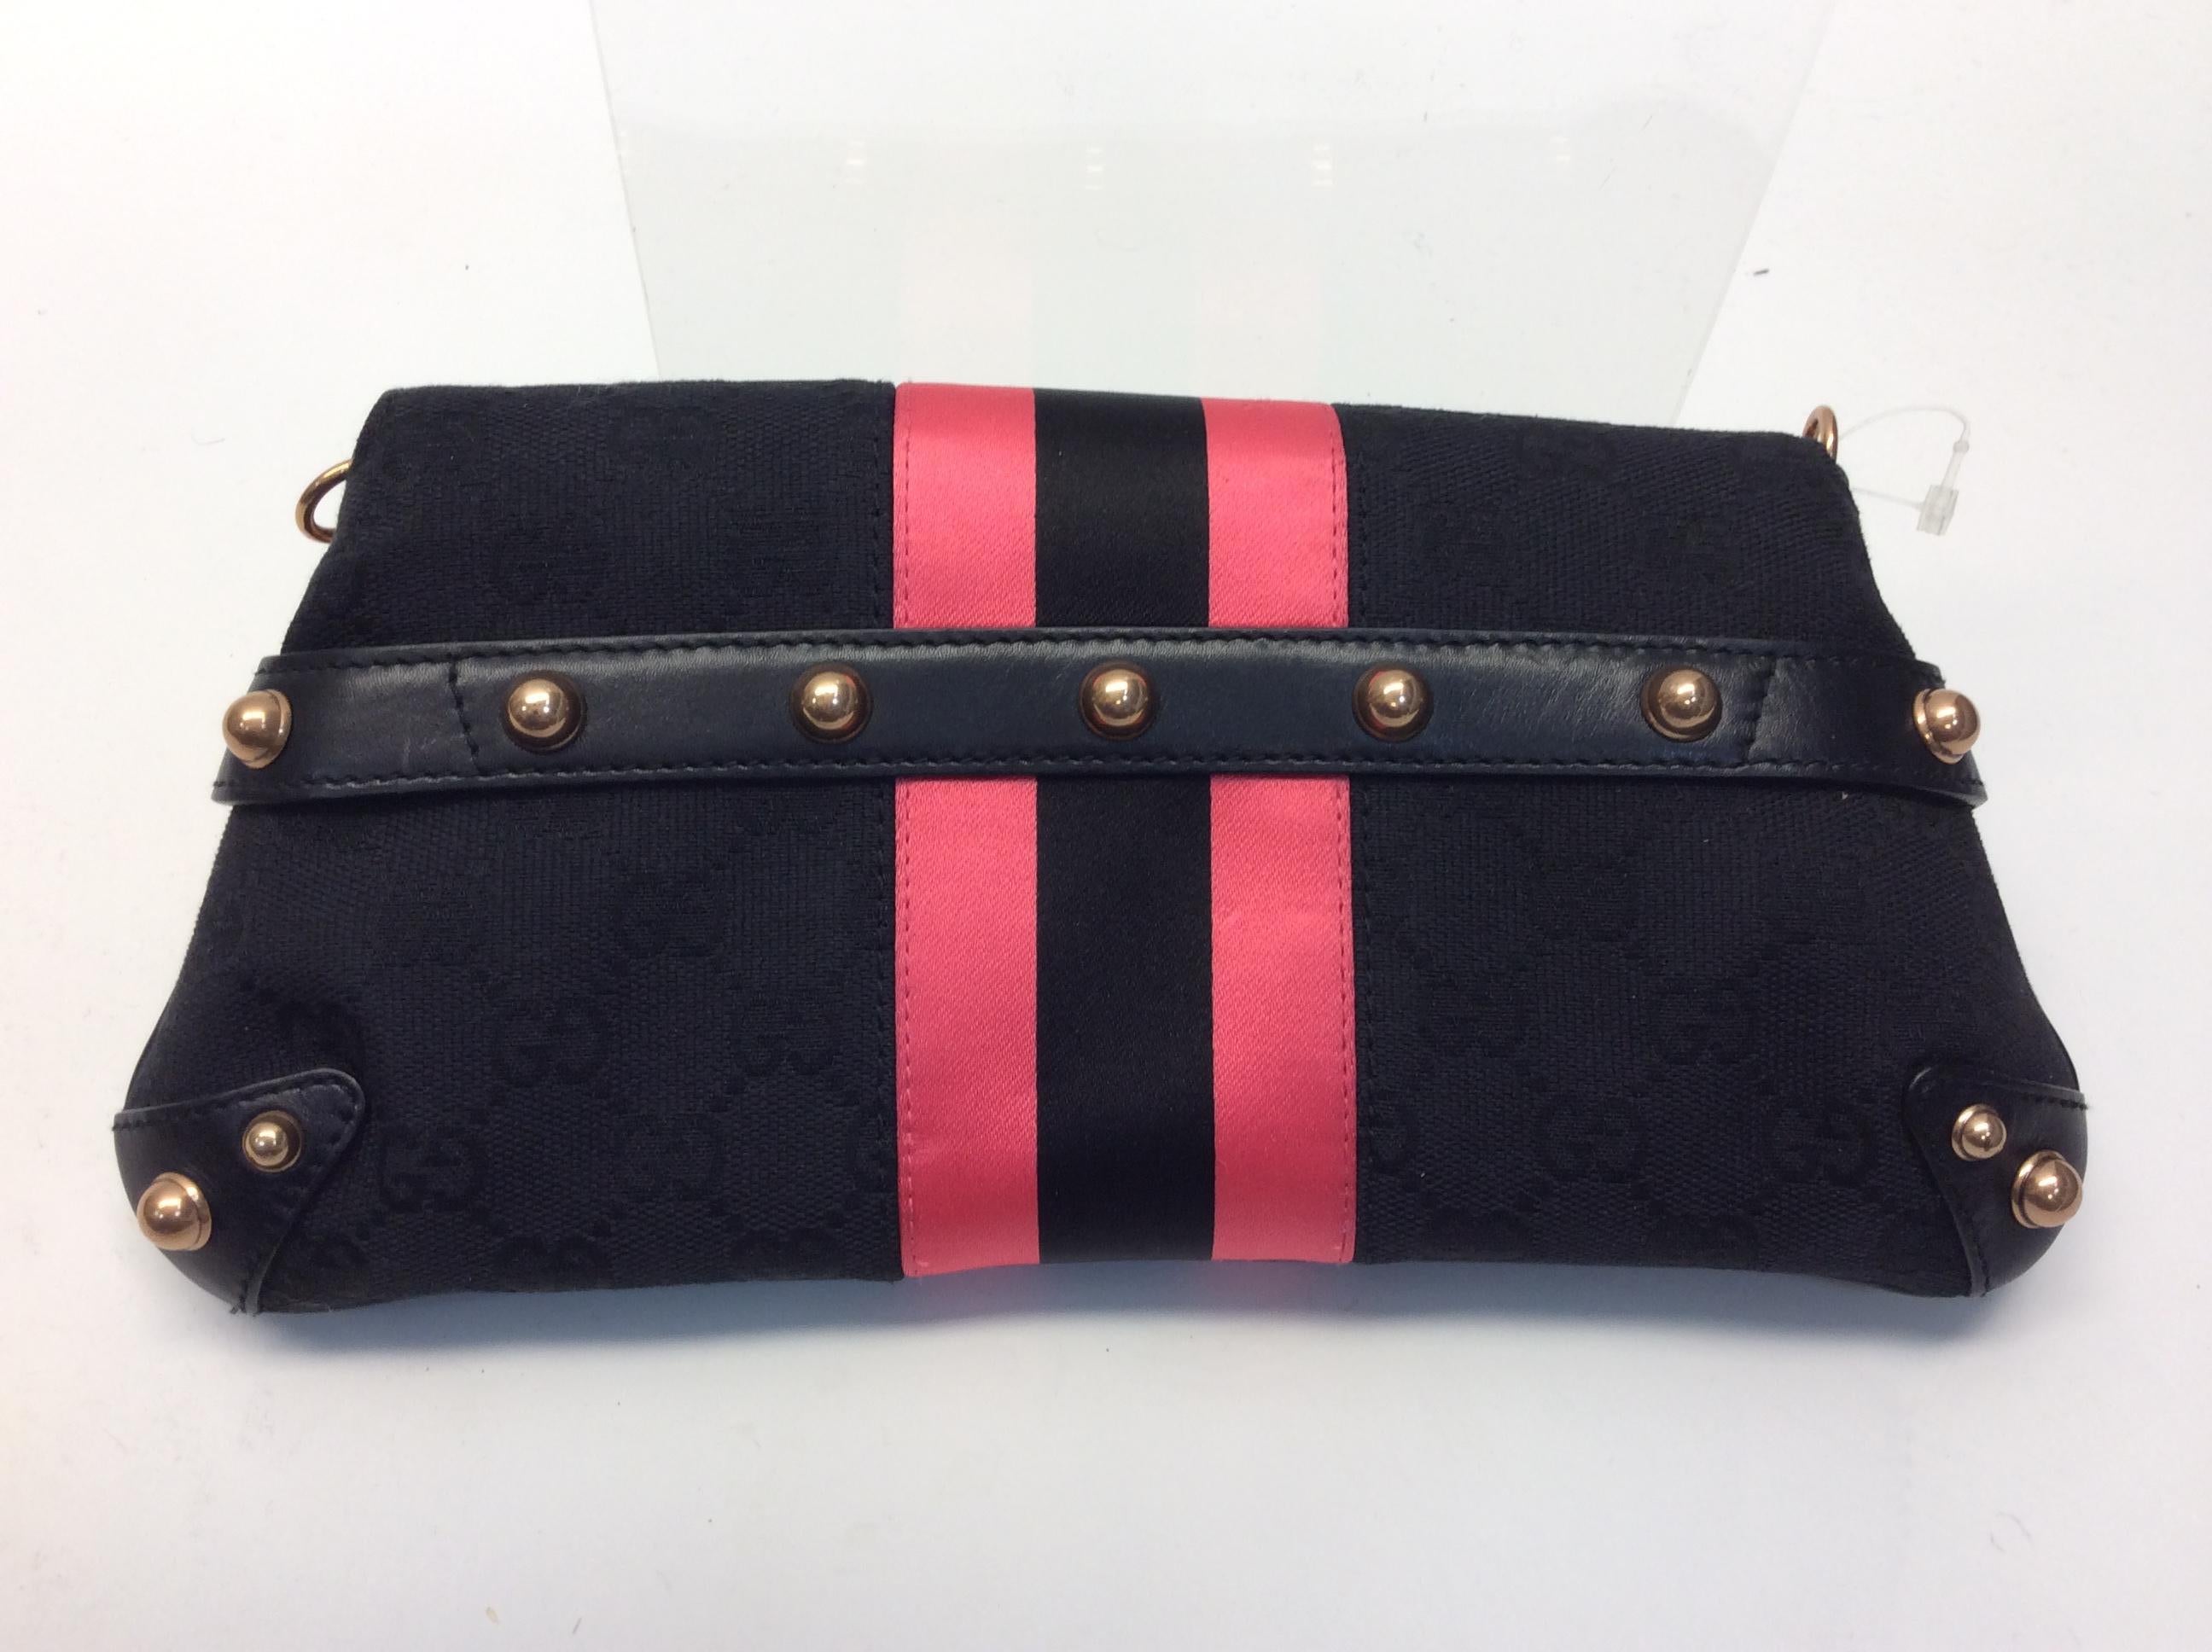 Gucci Black with Pink Stripes Small Shoulder Bag In Good Condition For Sale In Narberth, PA